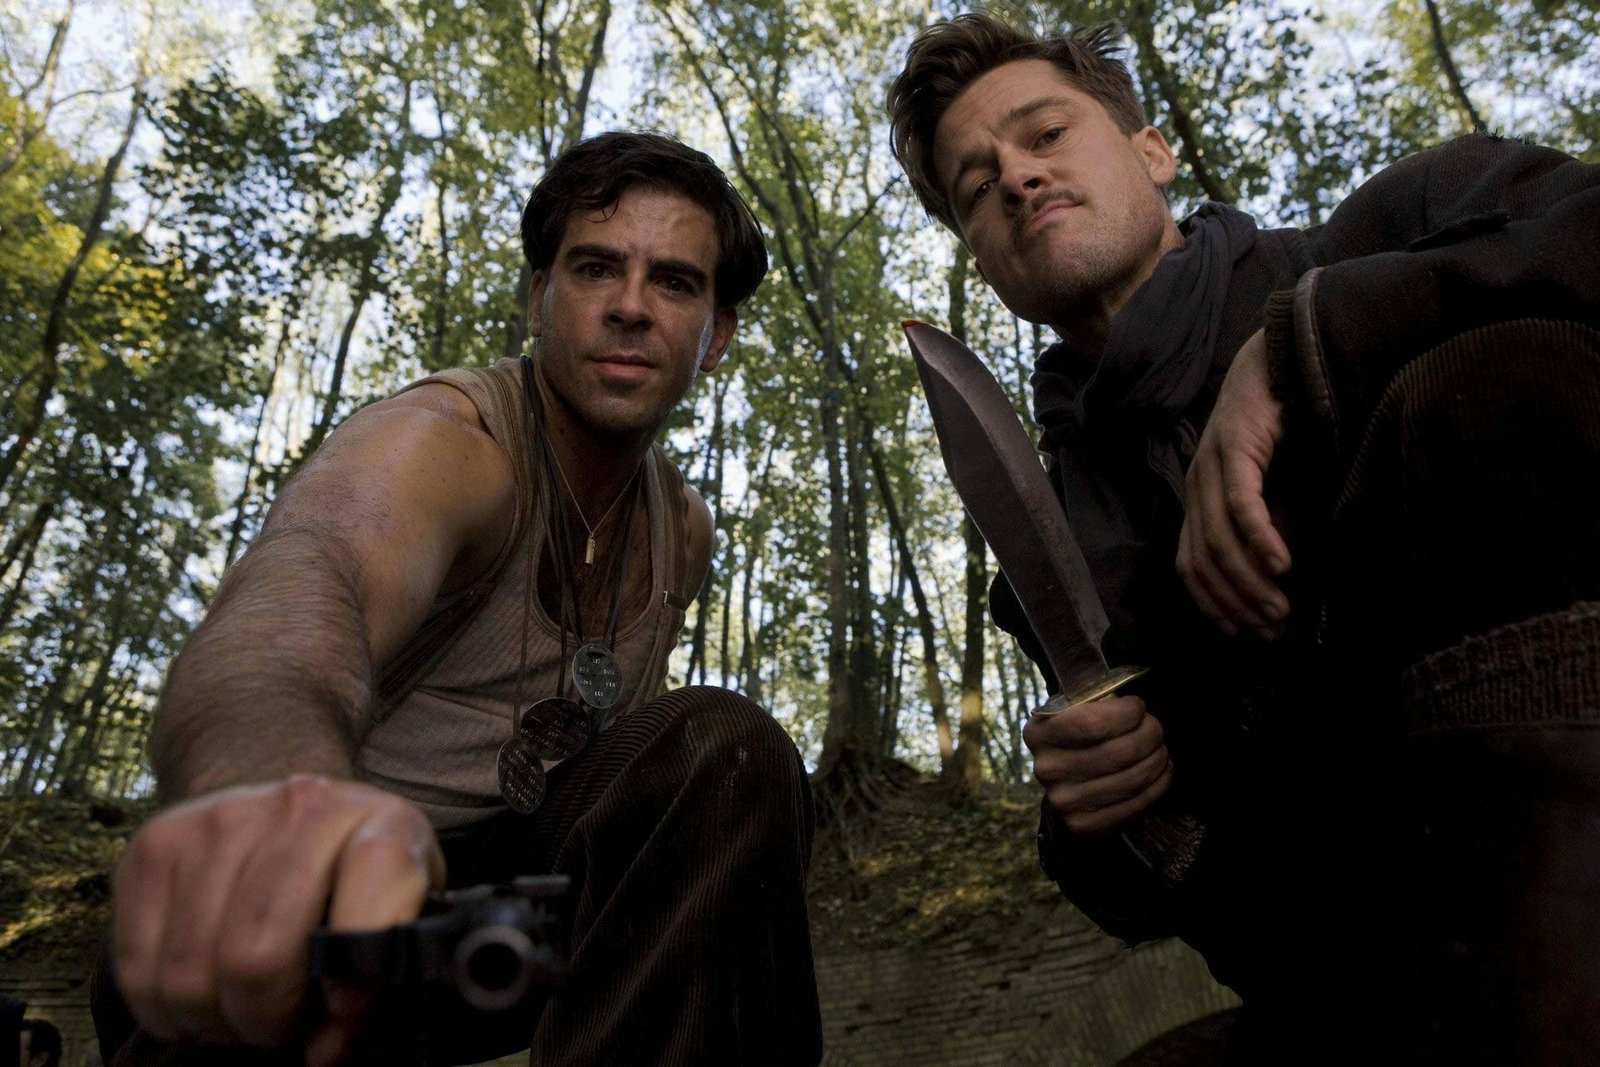 One Inglorious Basterds